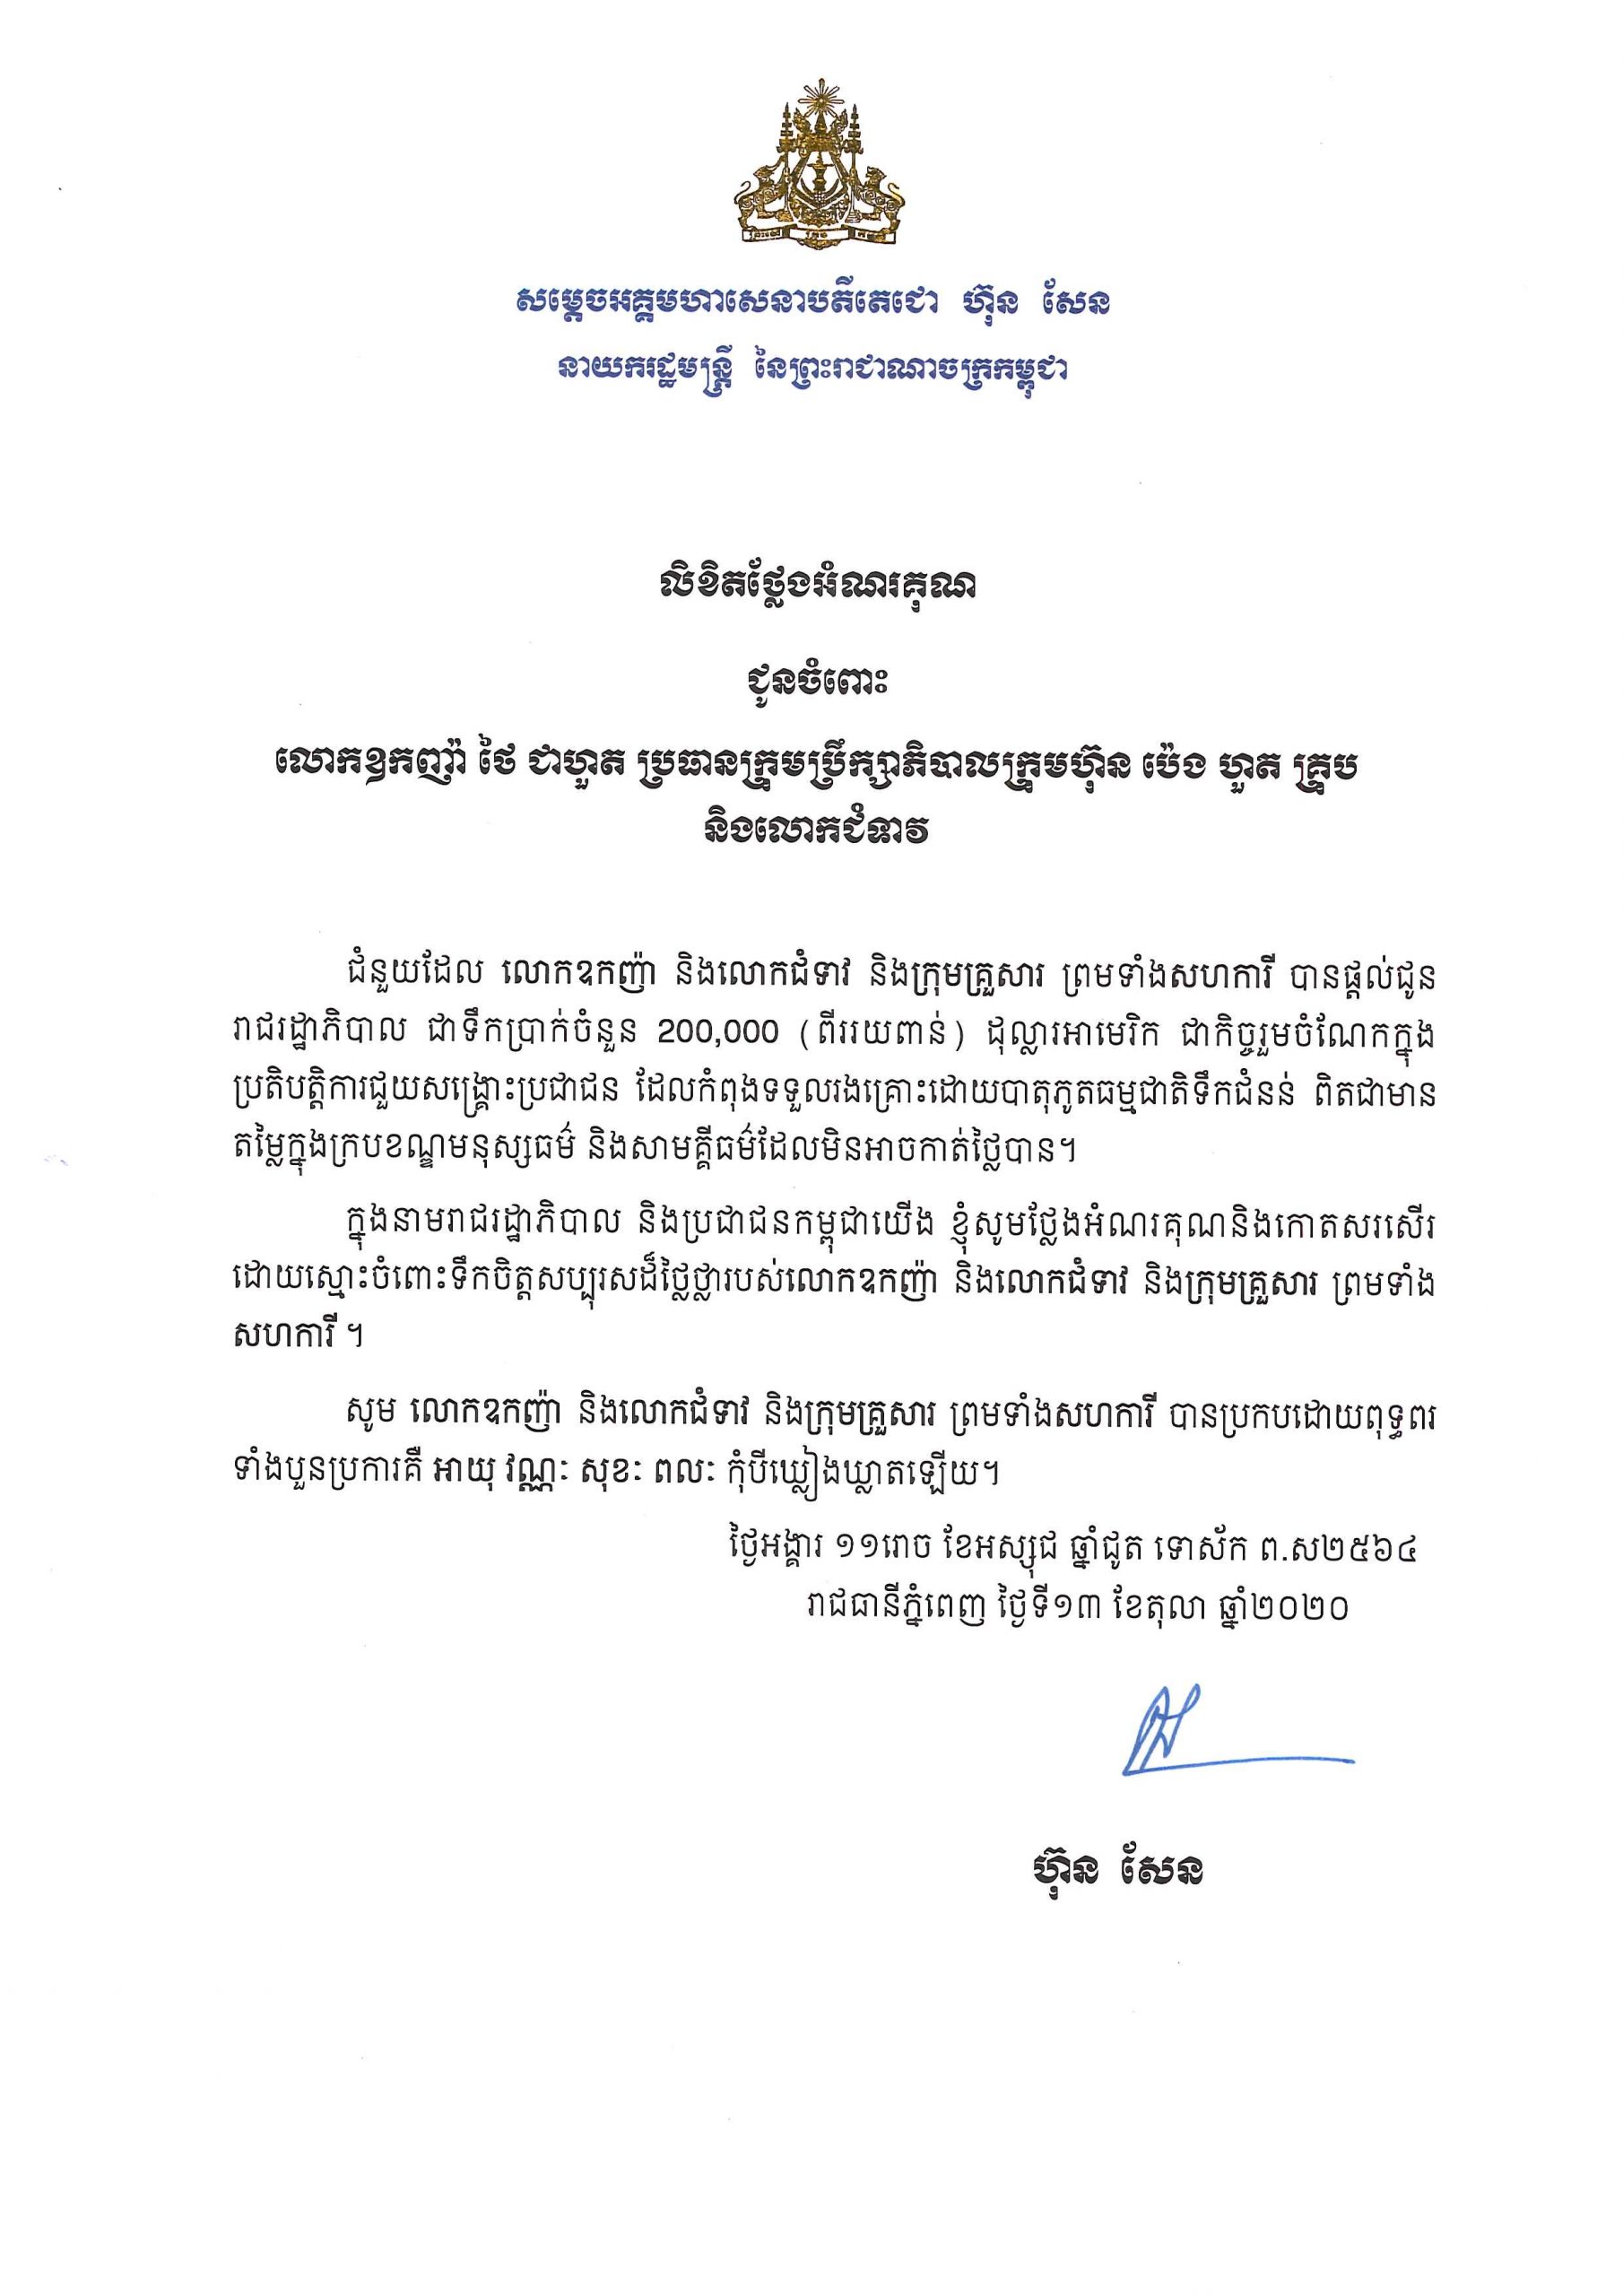 Certificate of Appreciation from Royal Government of Cambodia for donation to rescue people affected by flood